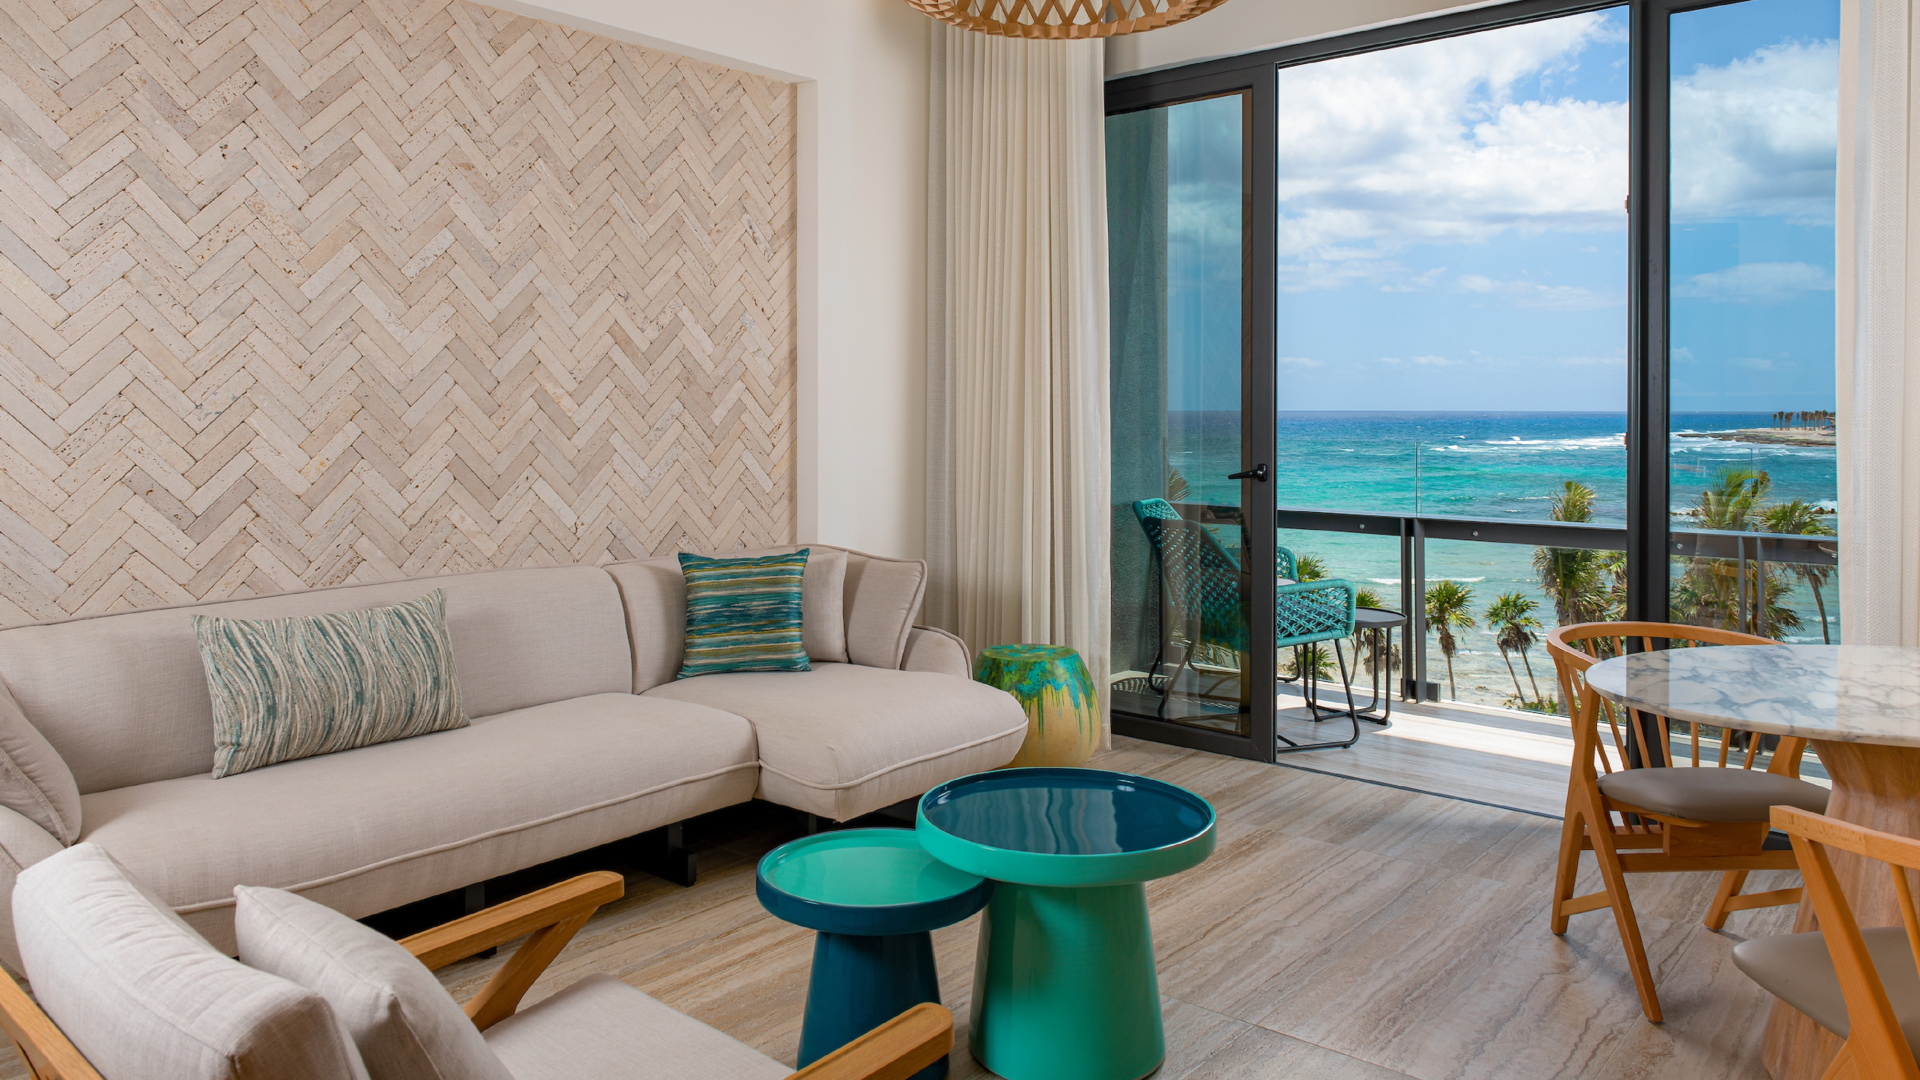 Suite Living Area and Balcony with Ocean View